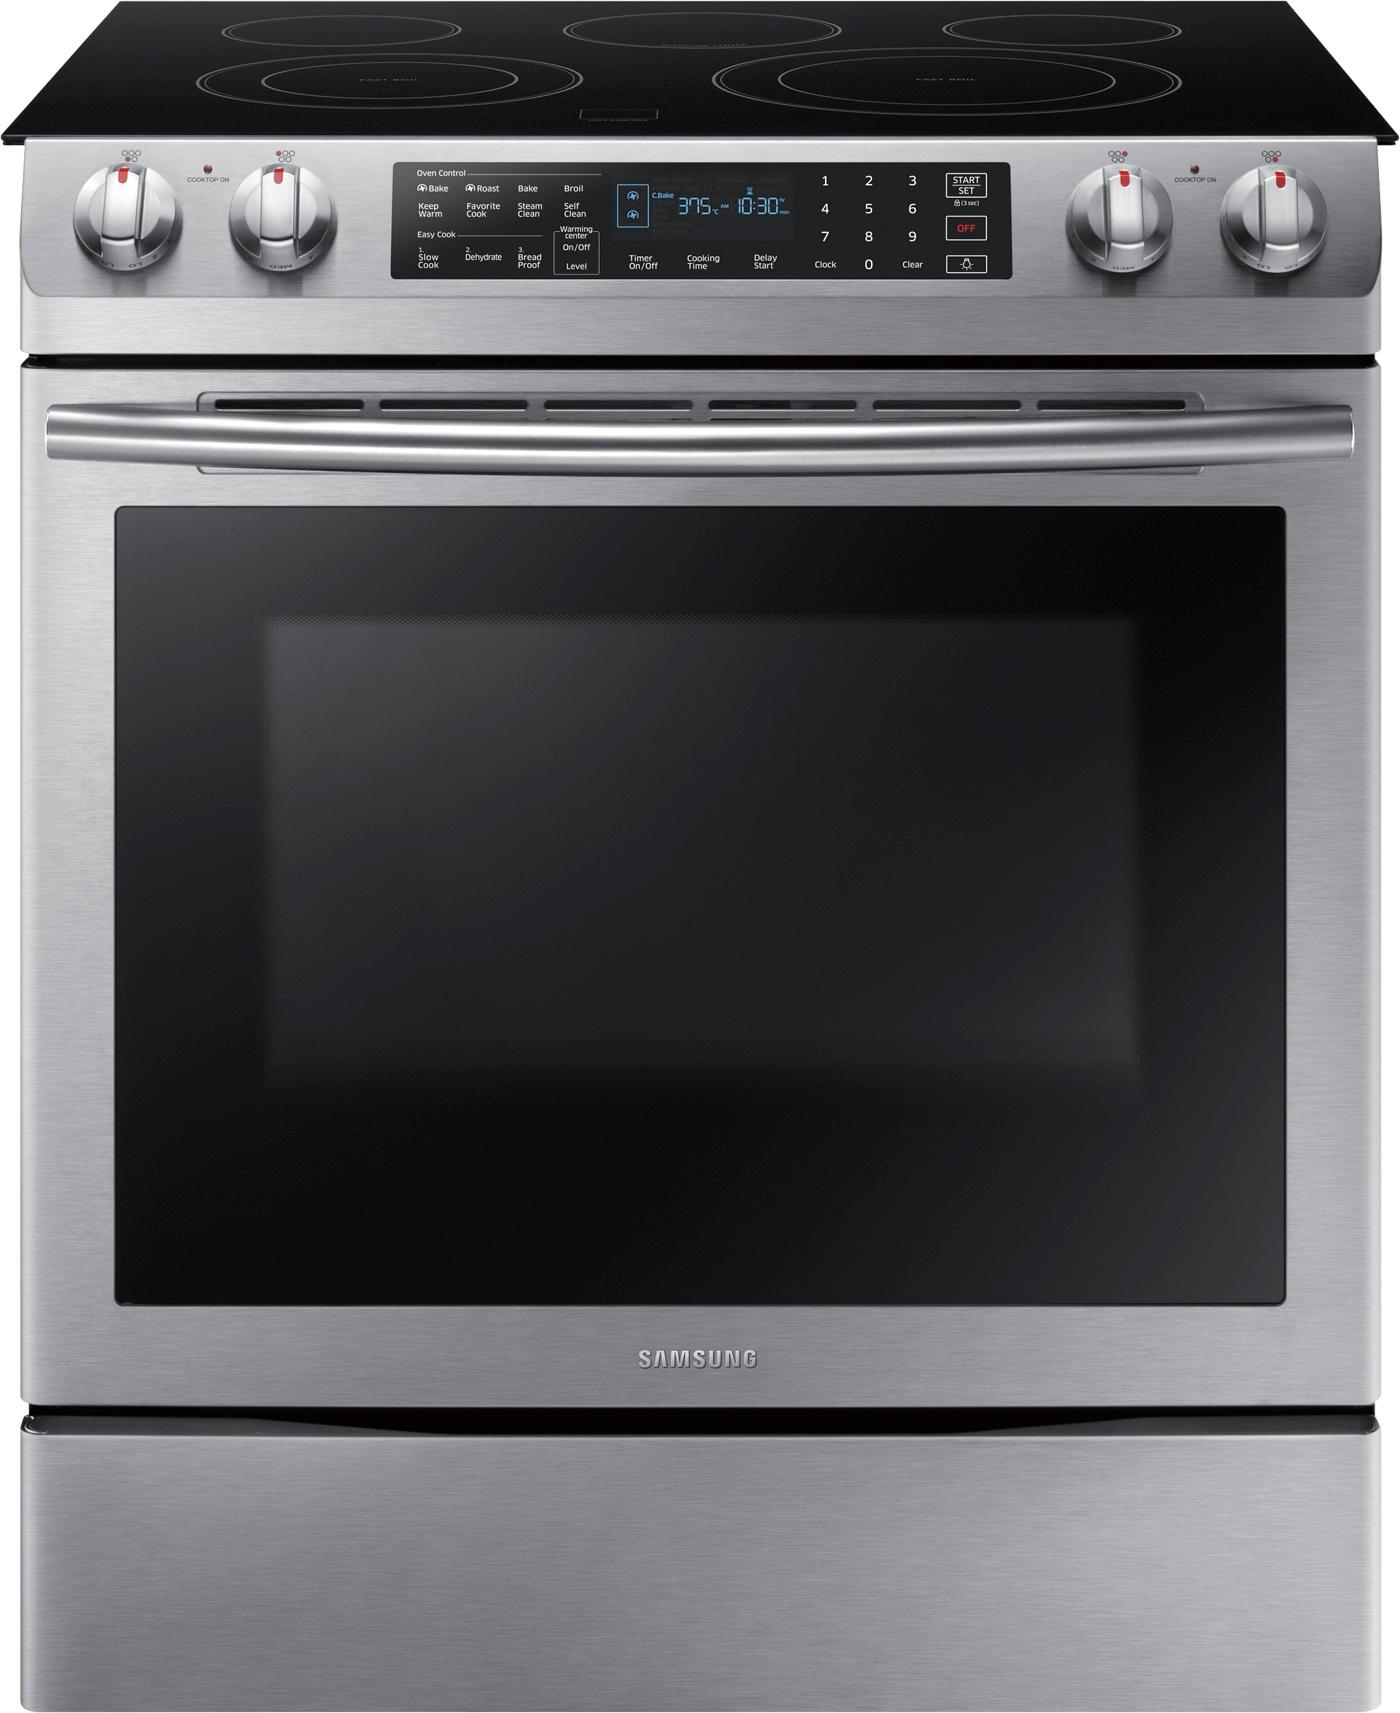 Samsung - 5.8 Cu. Ft. Electric Self-Cleaning Slide-In Range with Convection - Stainless steel